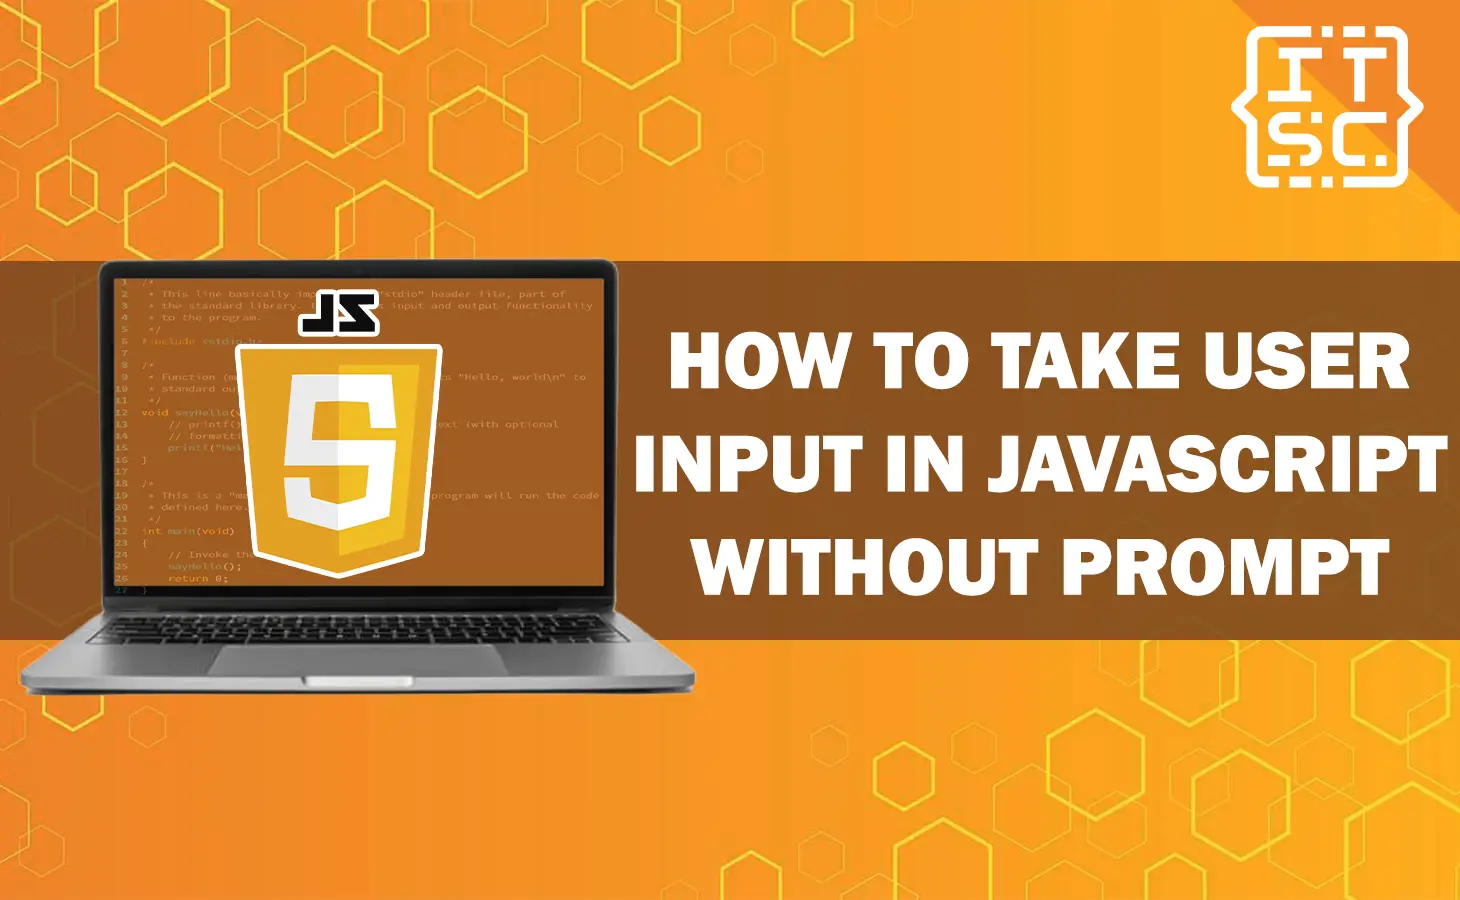 How to take user input in JavaScript without prompt